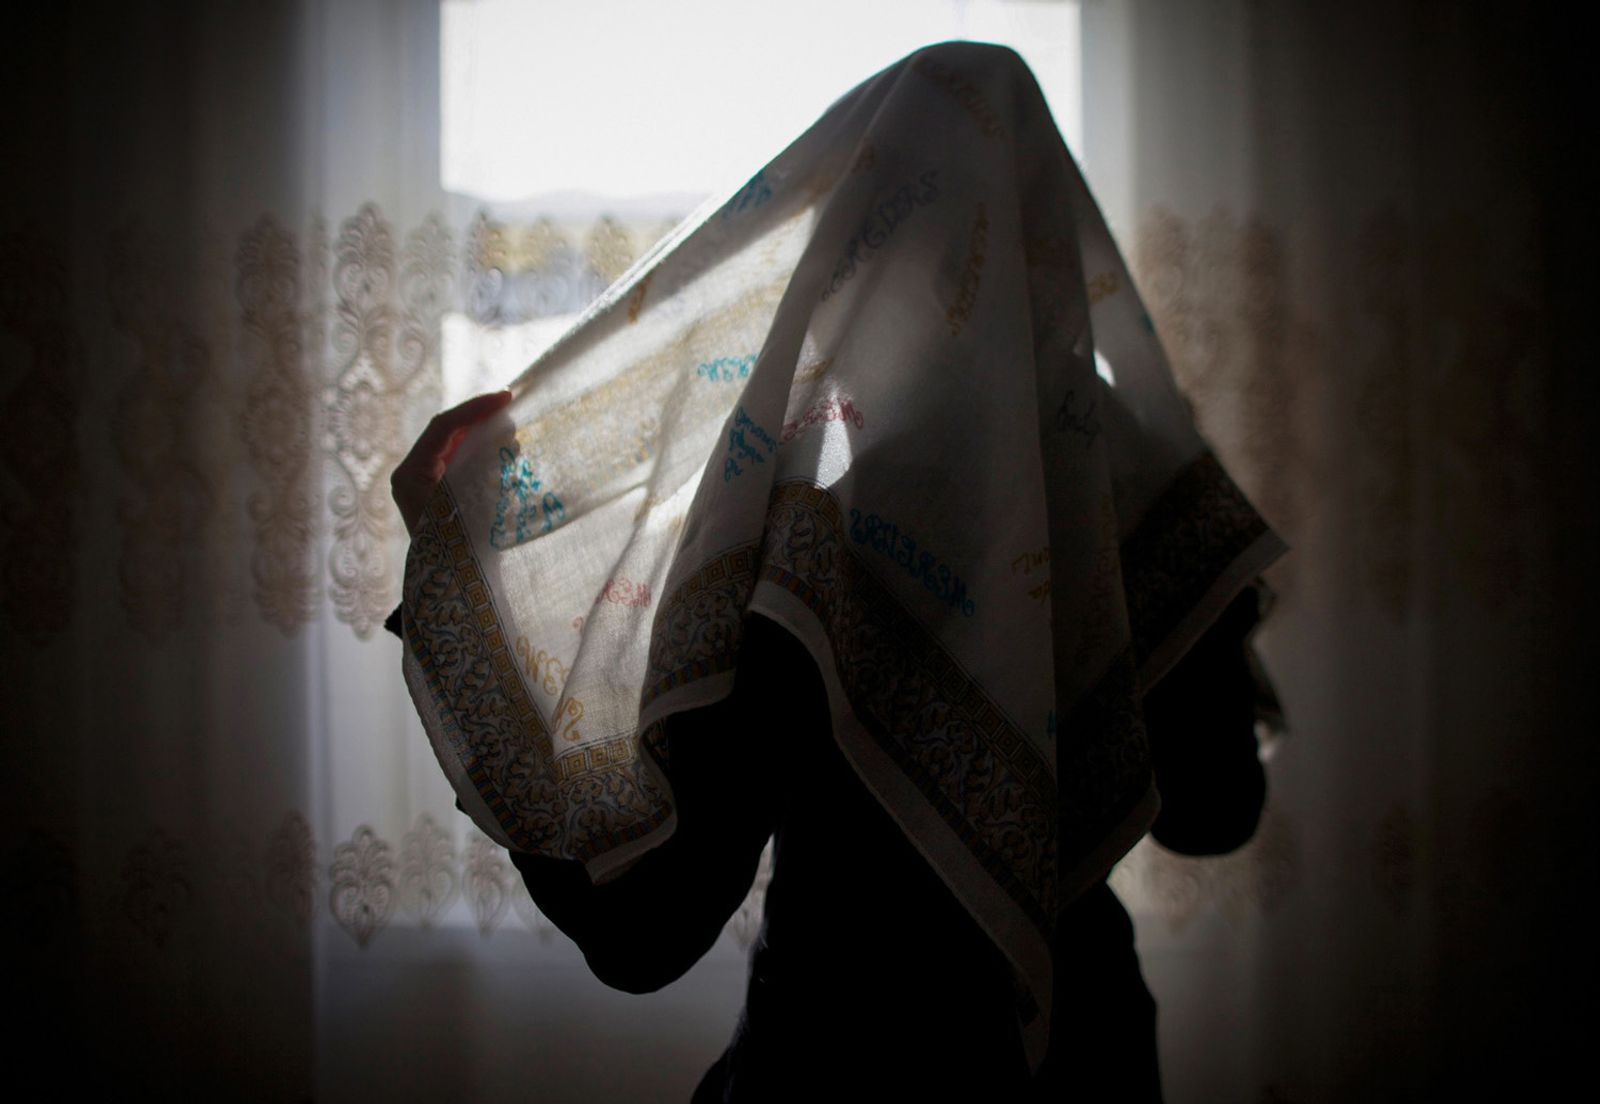 © Diana Markosian - Image from the Goodbye my chechnya photography project